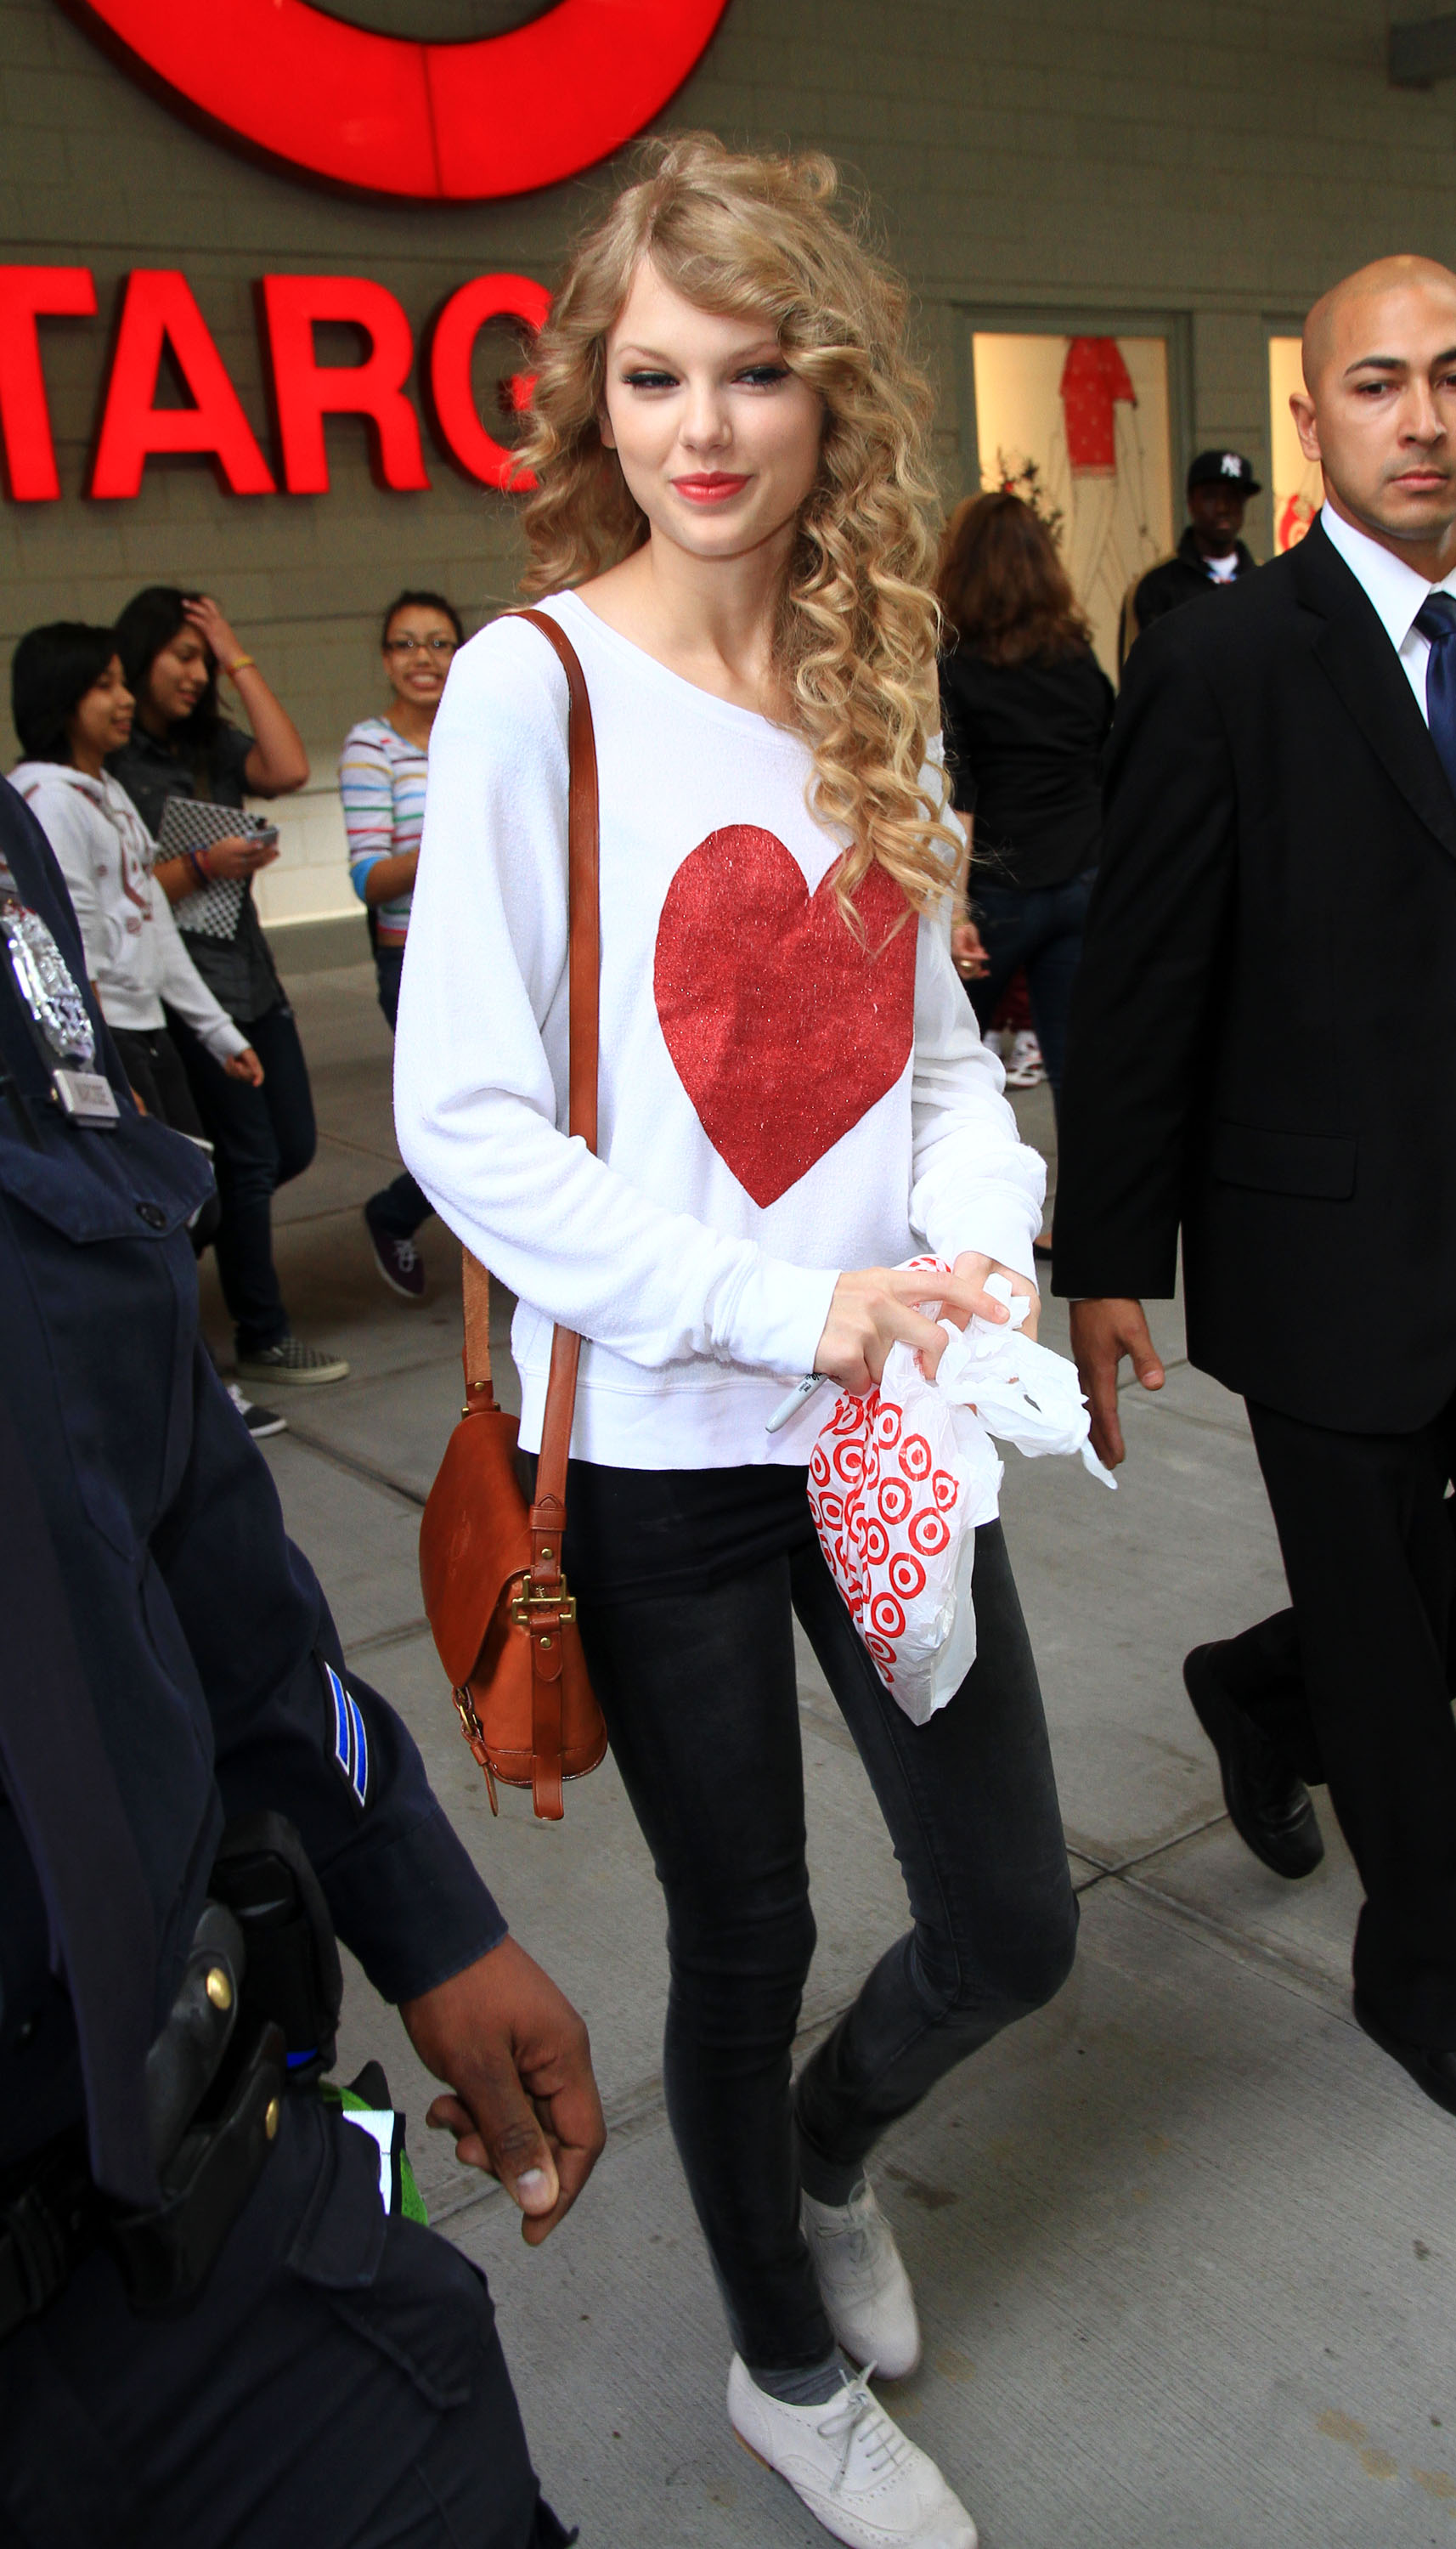 Taylor Swift Buying her album at Target in New York City October 25, 2010 | TAYLOR ...1714 x 3000